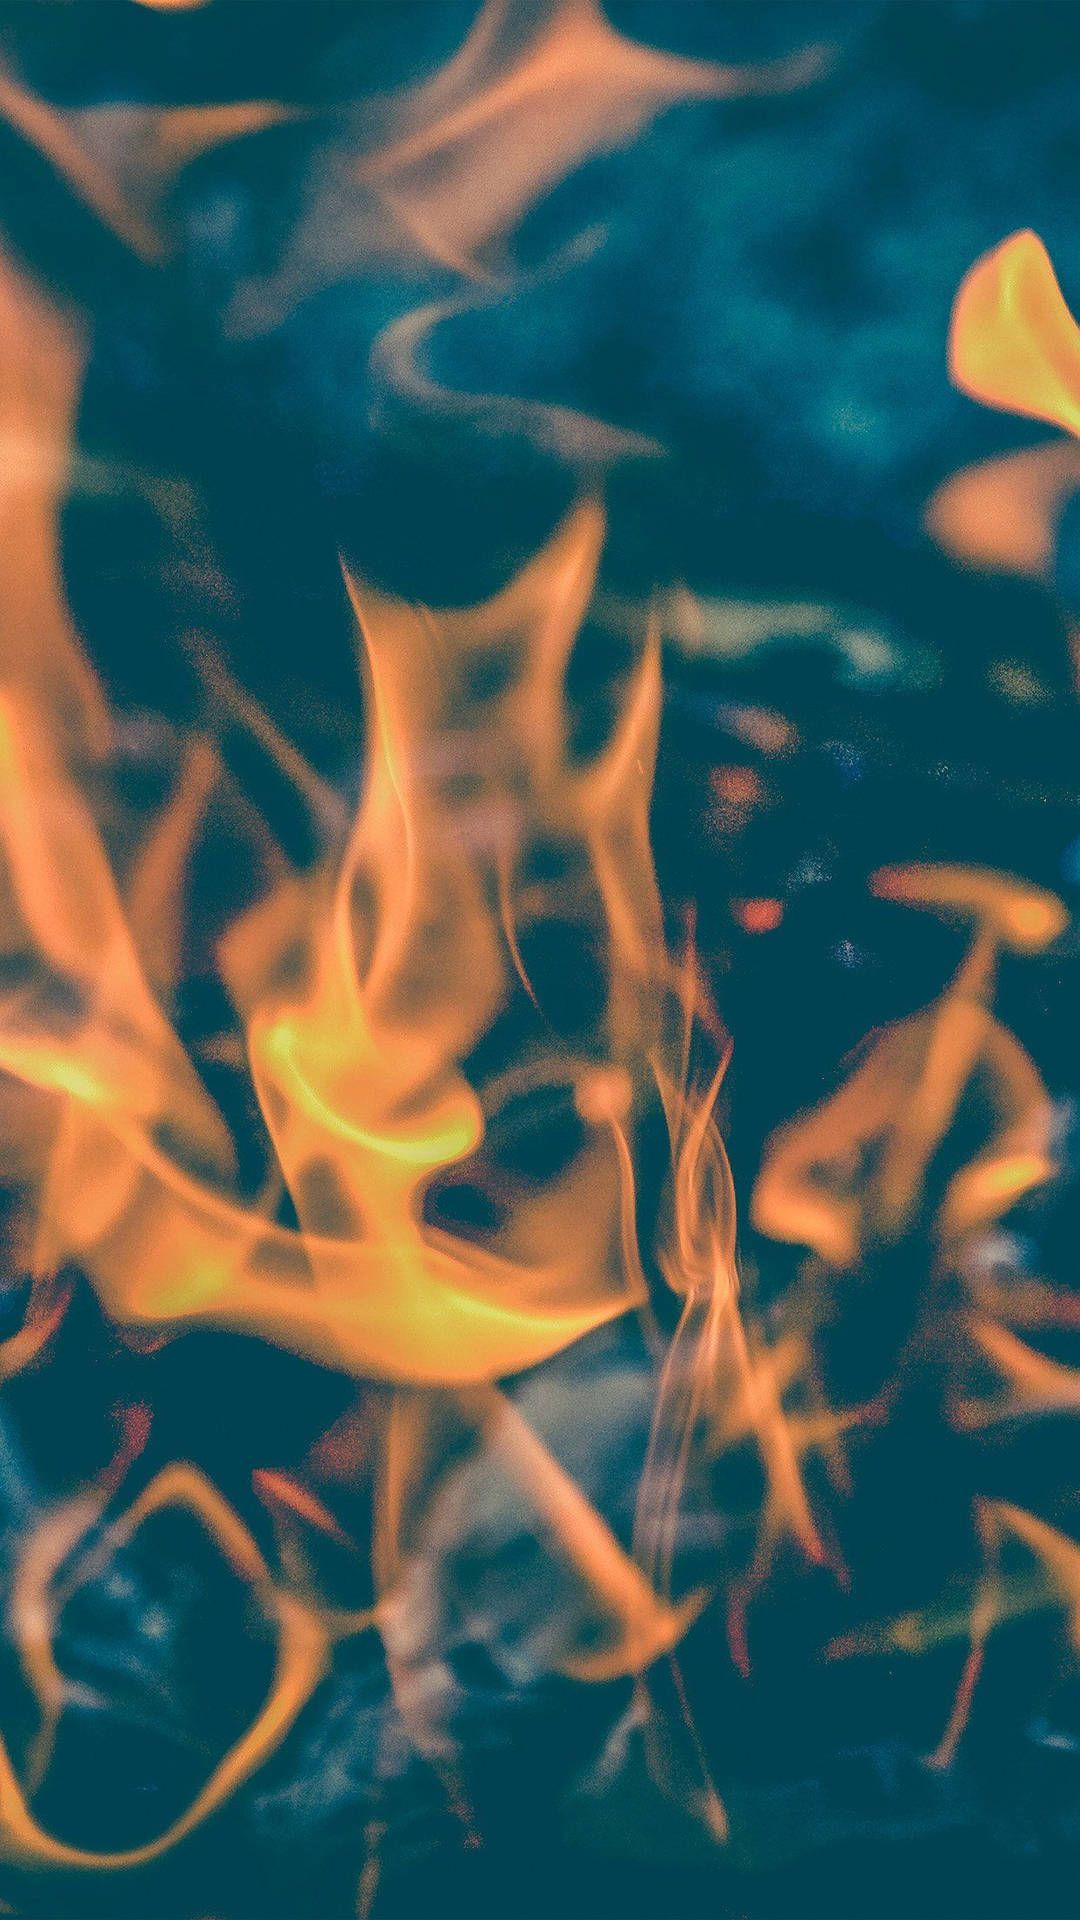 "Amber flames dance in the night sky". Wallpaper